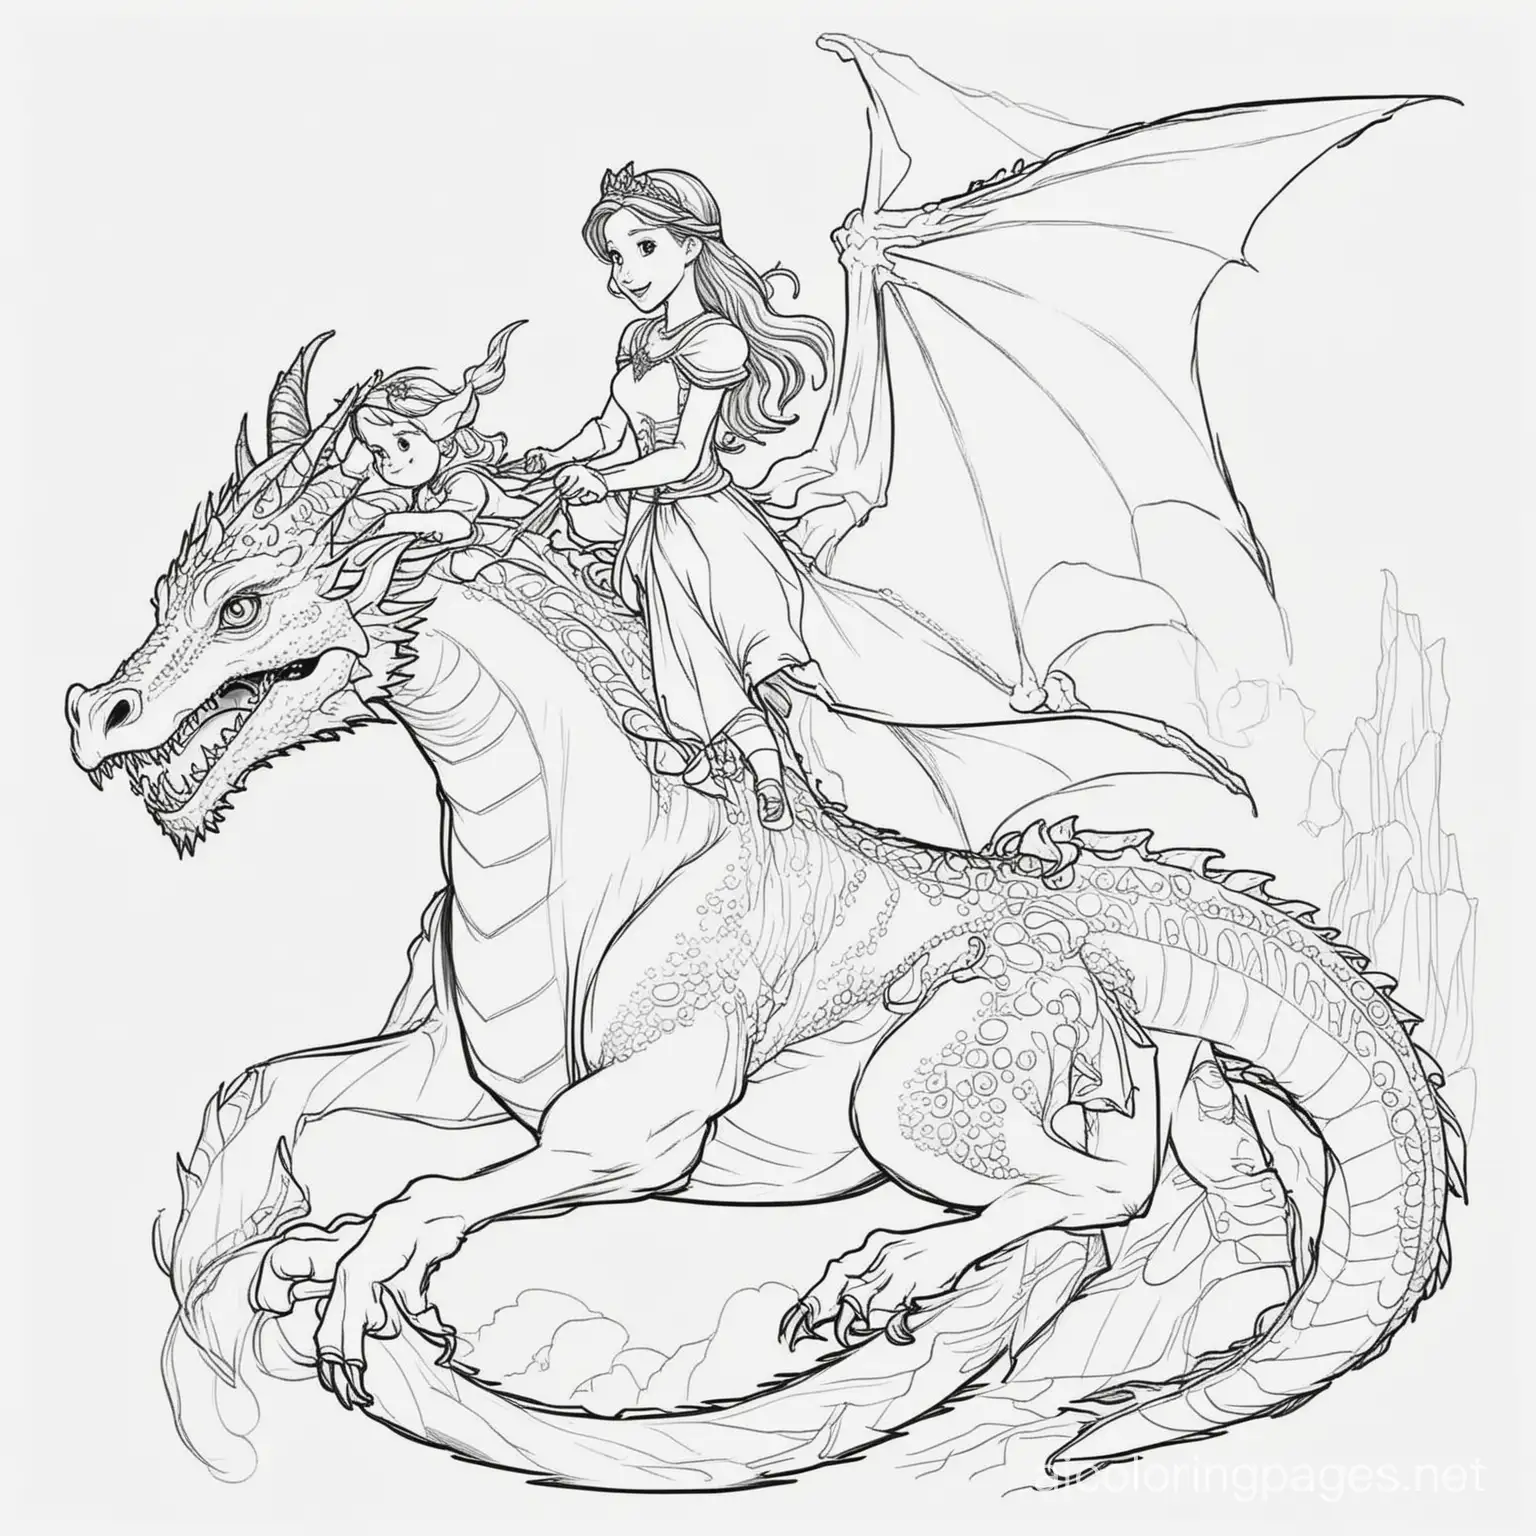 a princess riding a dragon, Coloring Page, black and white, line art, white background, Simplicity, Ample White Space. The background of the coloring page is plain white to make it easy for young children to color within the lines. The outlines of all the subjects are easy to distinguish, making it simple for kids to color without too much difficulty